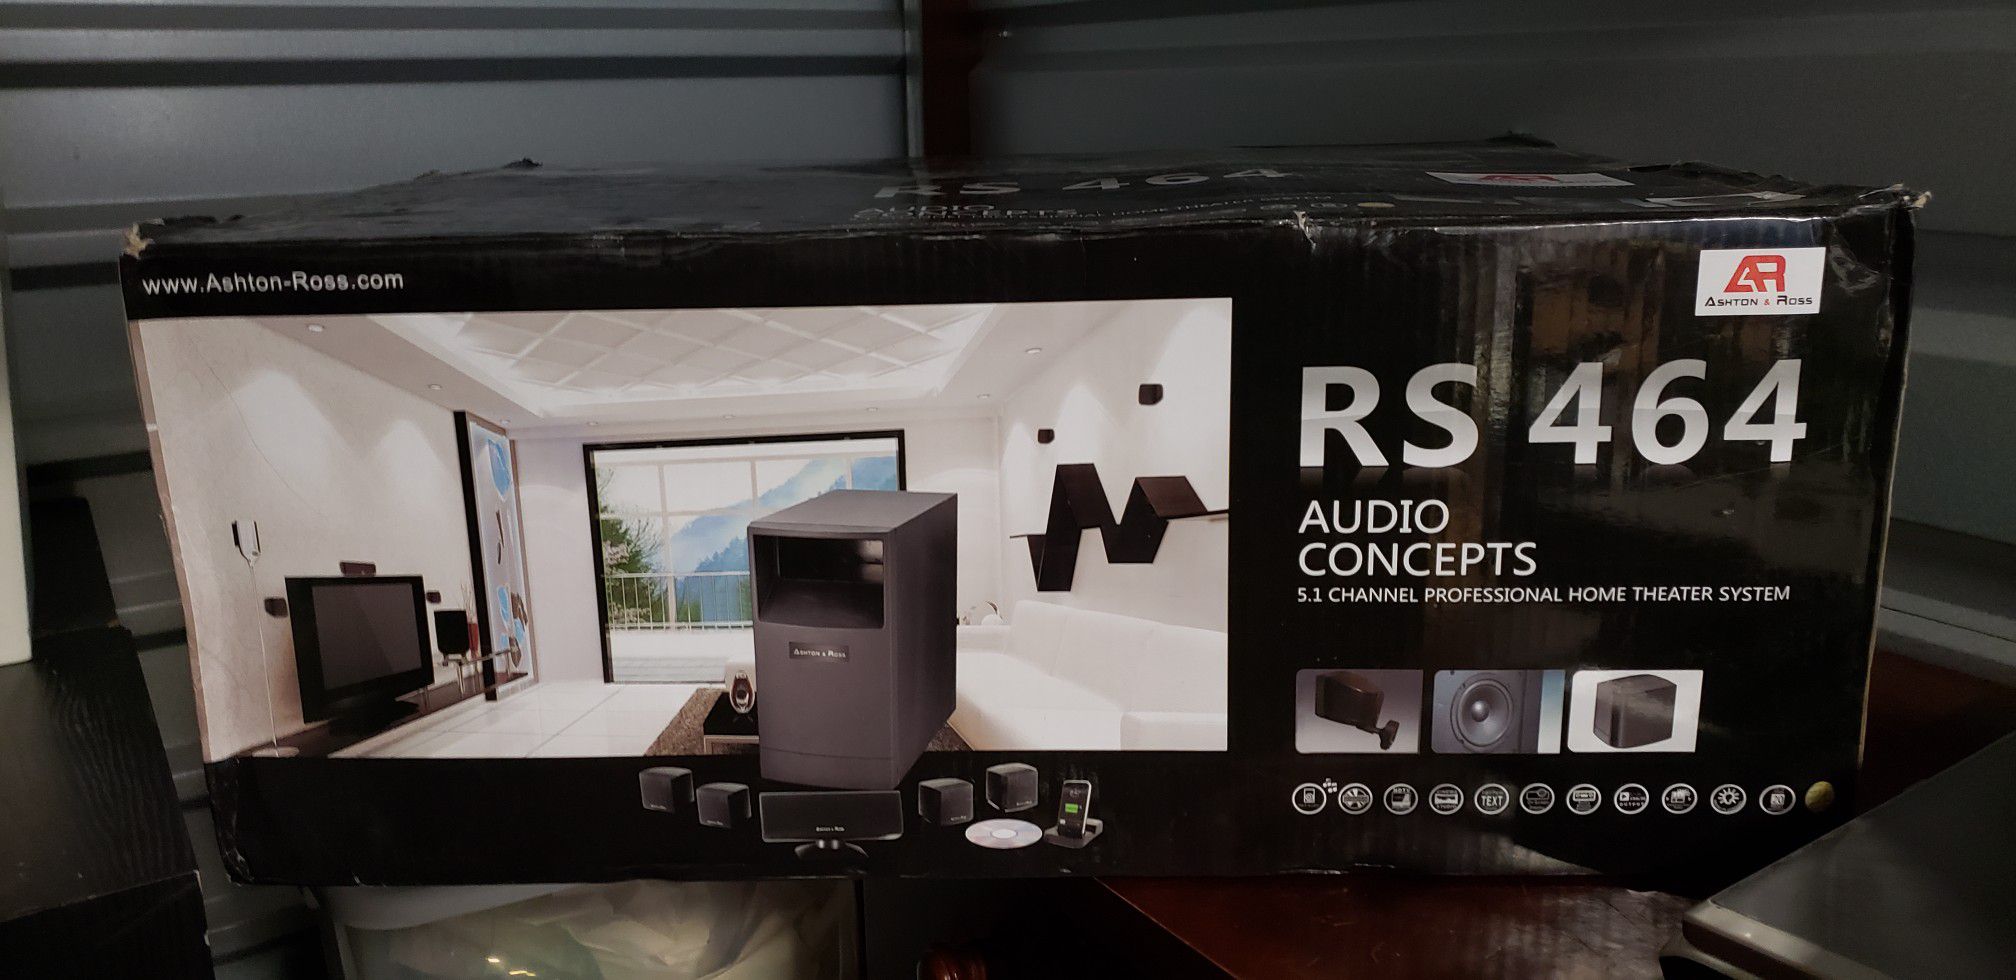 NEW!! Ashton-Ross Audio Concepts Pro-Series RS 464 Home Theater Speakers